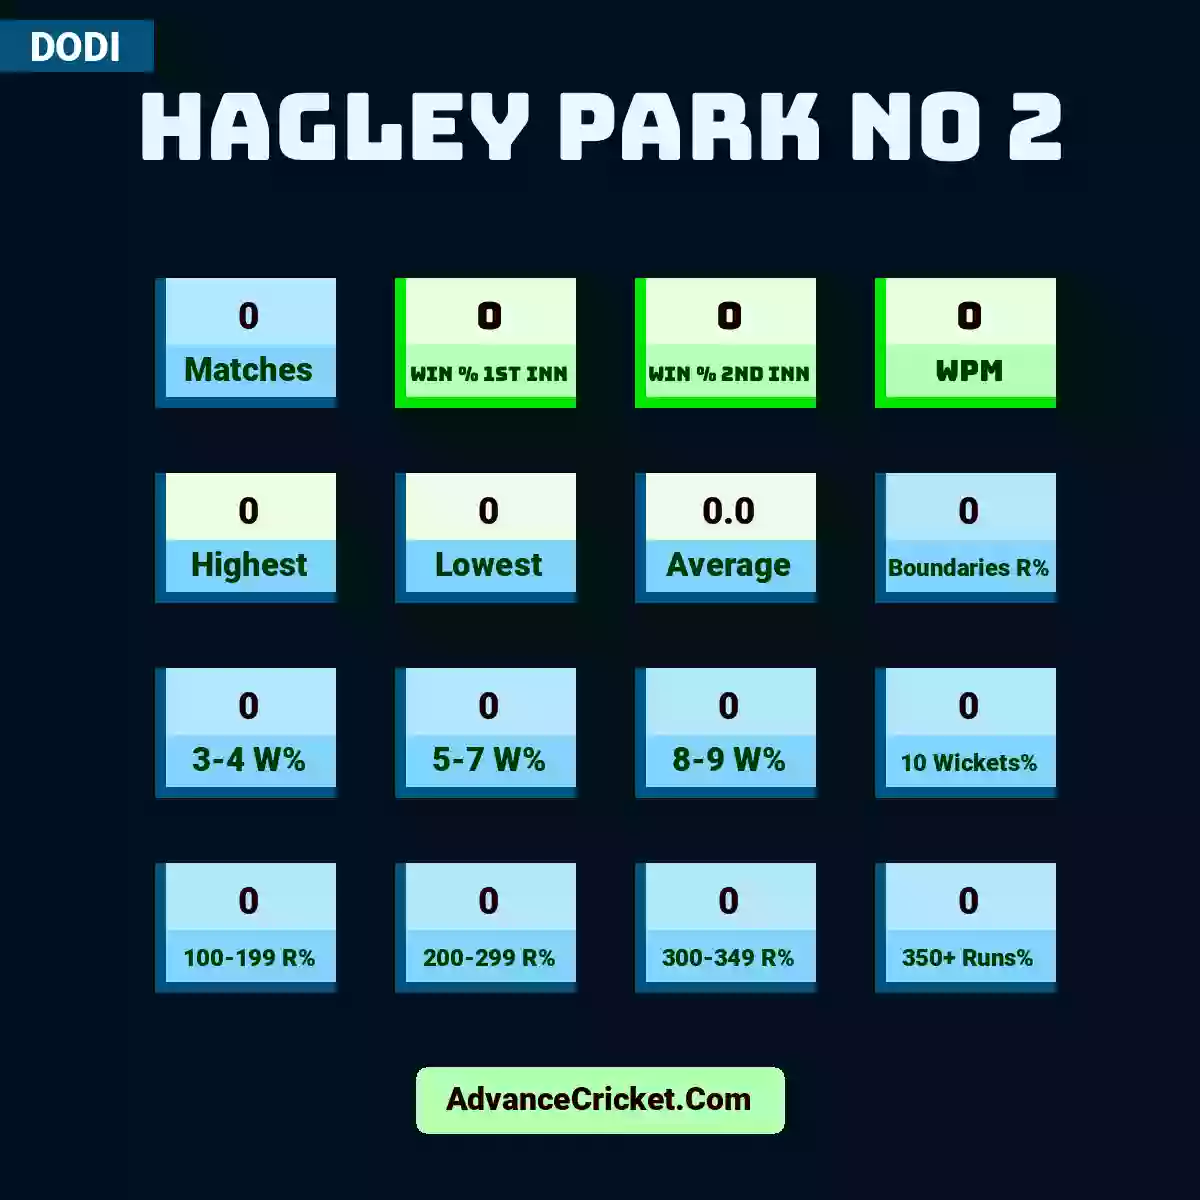 Image showing Hagley Park No 2 with Matches: 0, Win % 1st Inn: 0, Win % 2nd Inn: 0, WPM: 0, Highest: 0, Lowest: 0, Average: 0.0, Boundaries R%: 0, 3-4 W%: 0, 5-7 W%: 0, 8-9 W%: 0, 10 Wickets%: 0, 100-199 R%: 0, 200-299 R%: 0, 300-349 R%: 0, 350+ Runs%: 0.